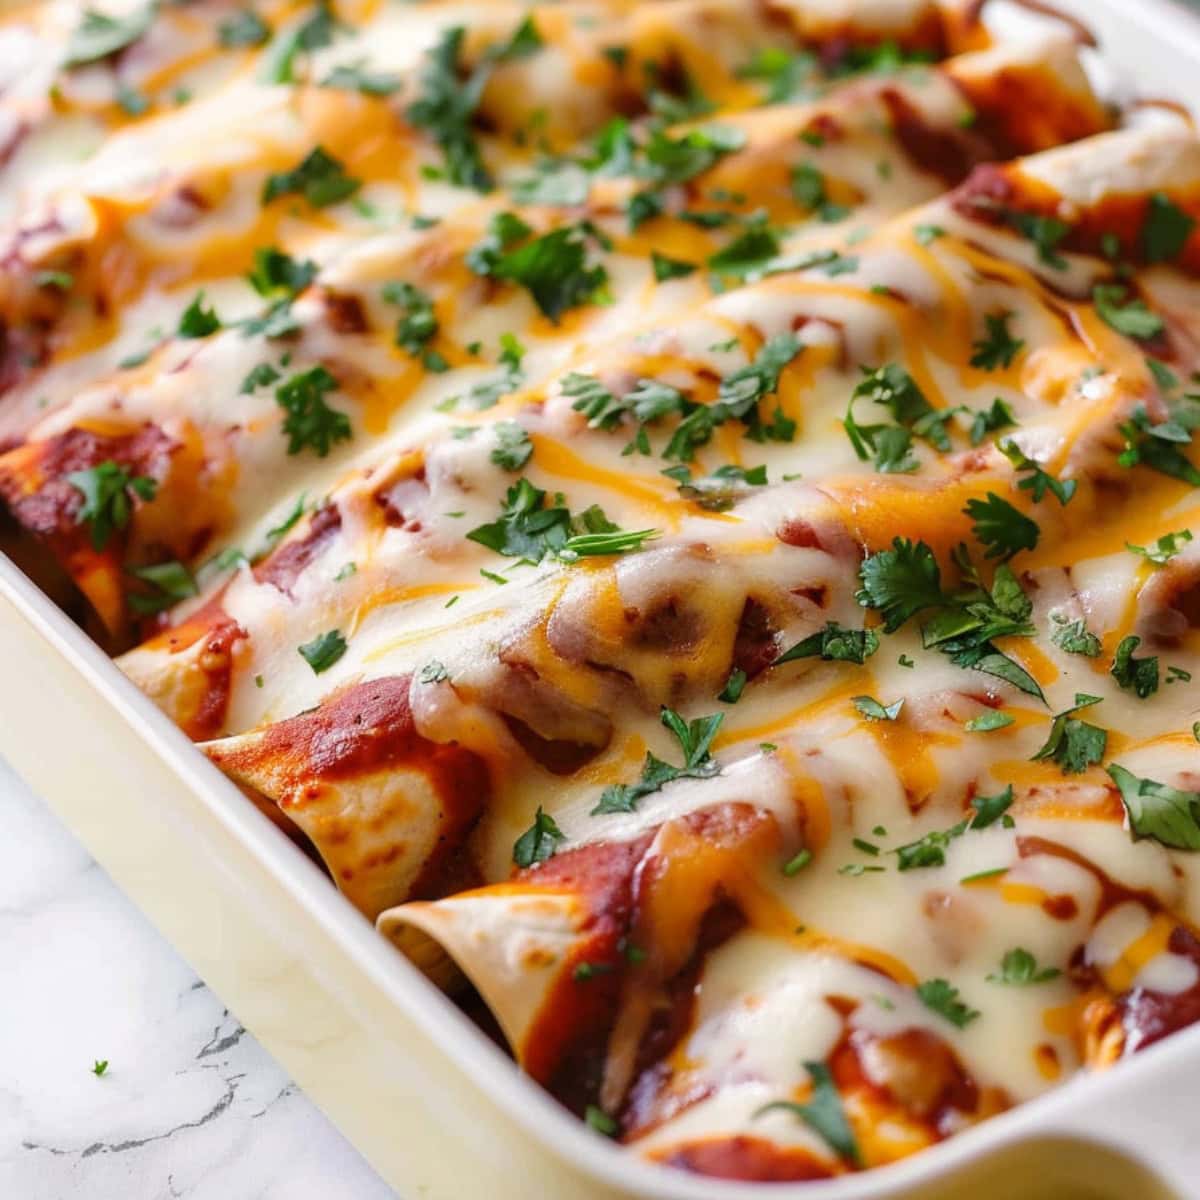 Cheesy pulled pork enchiladas with sauce on a yellow rectangular baking dish.